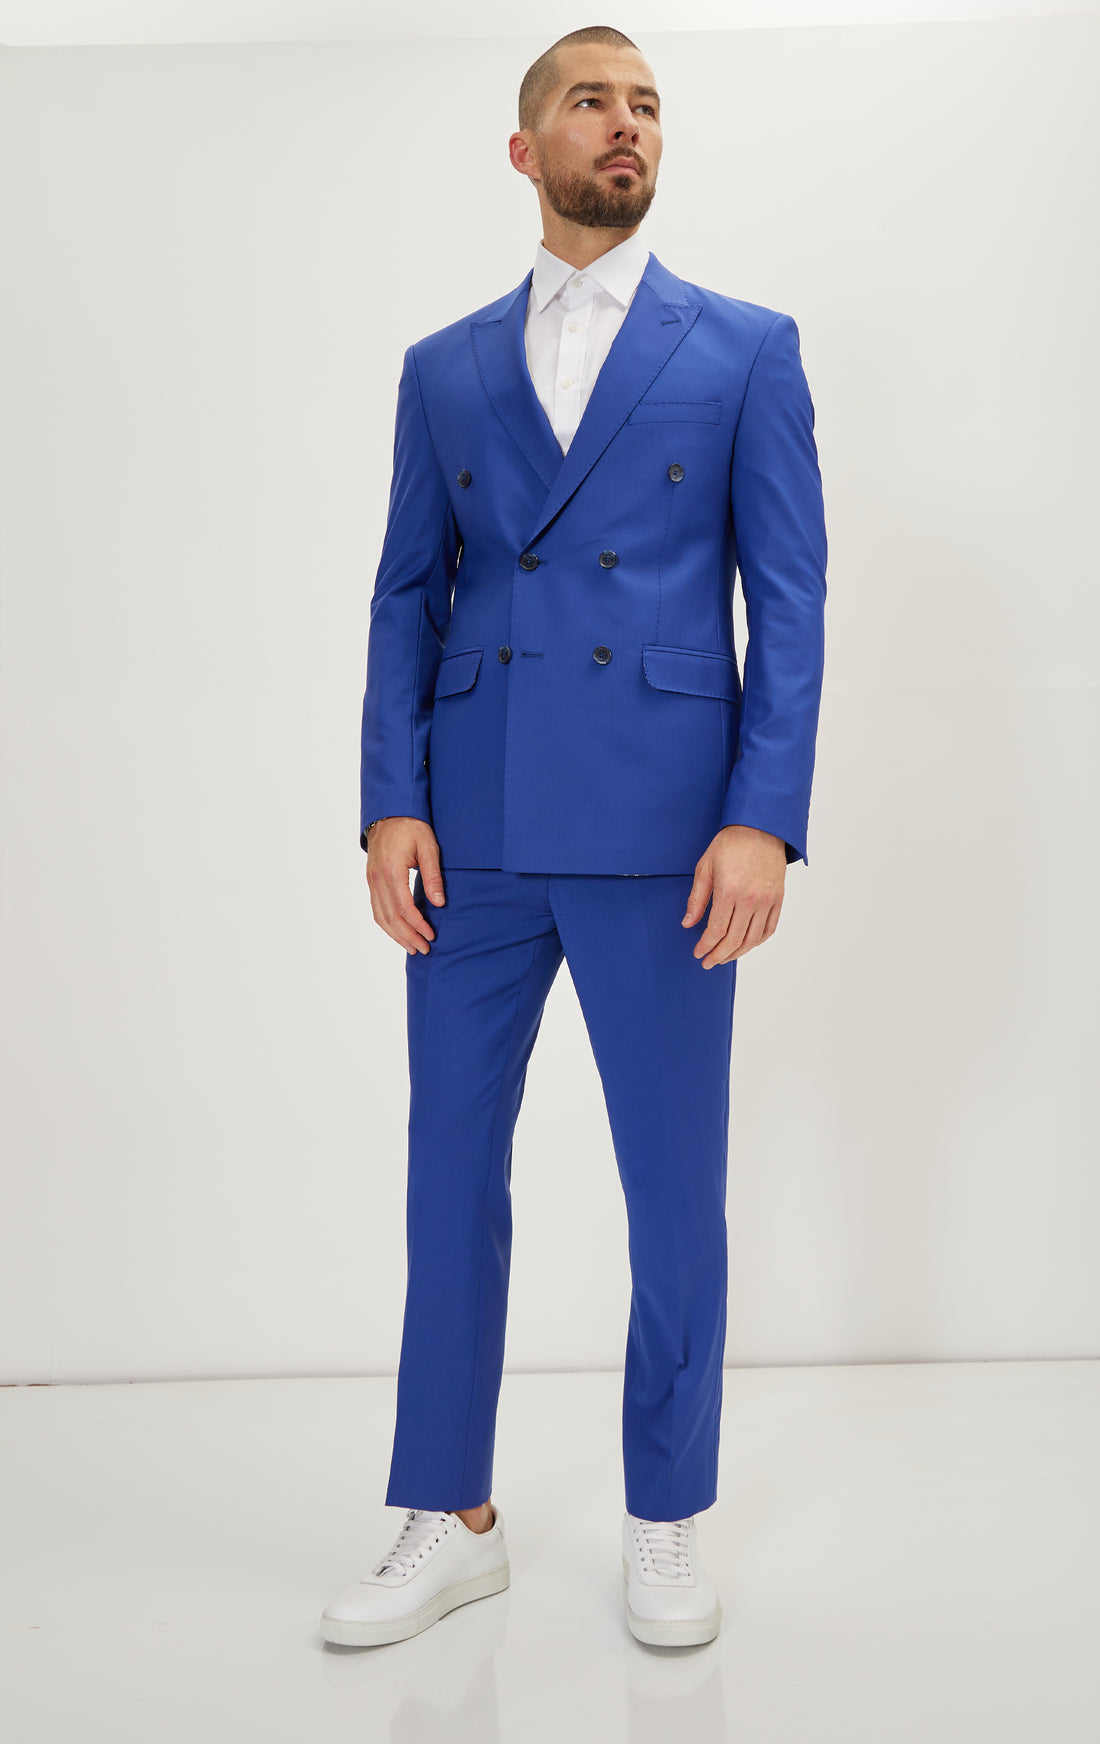 N° R206 SUPER 120S MERINO WOOL DOUBLE BREASTED SUIT - REFLEX BLUE